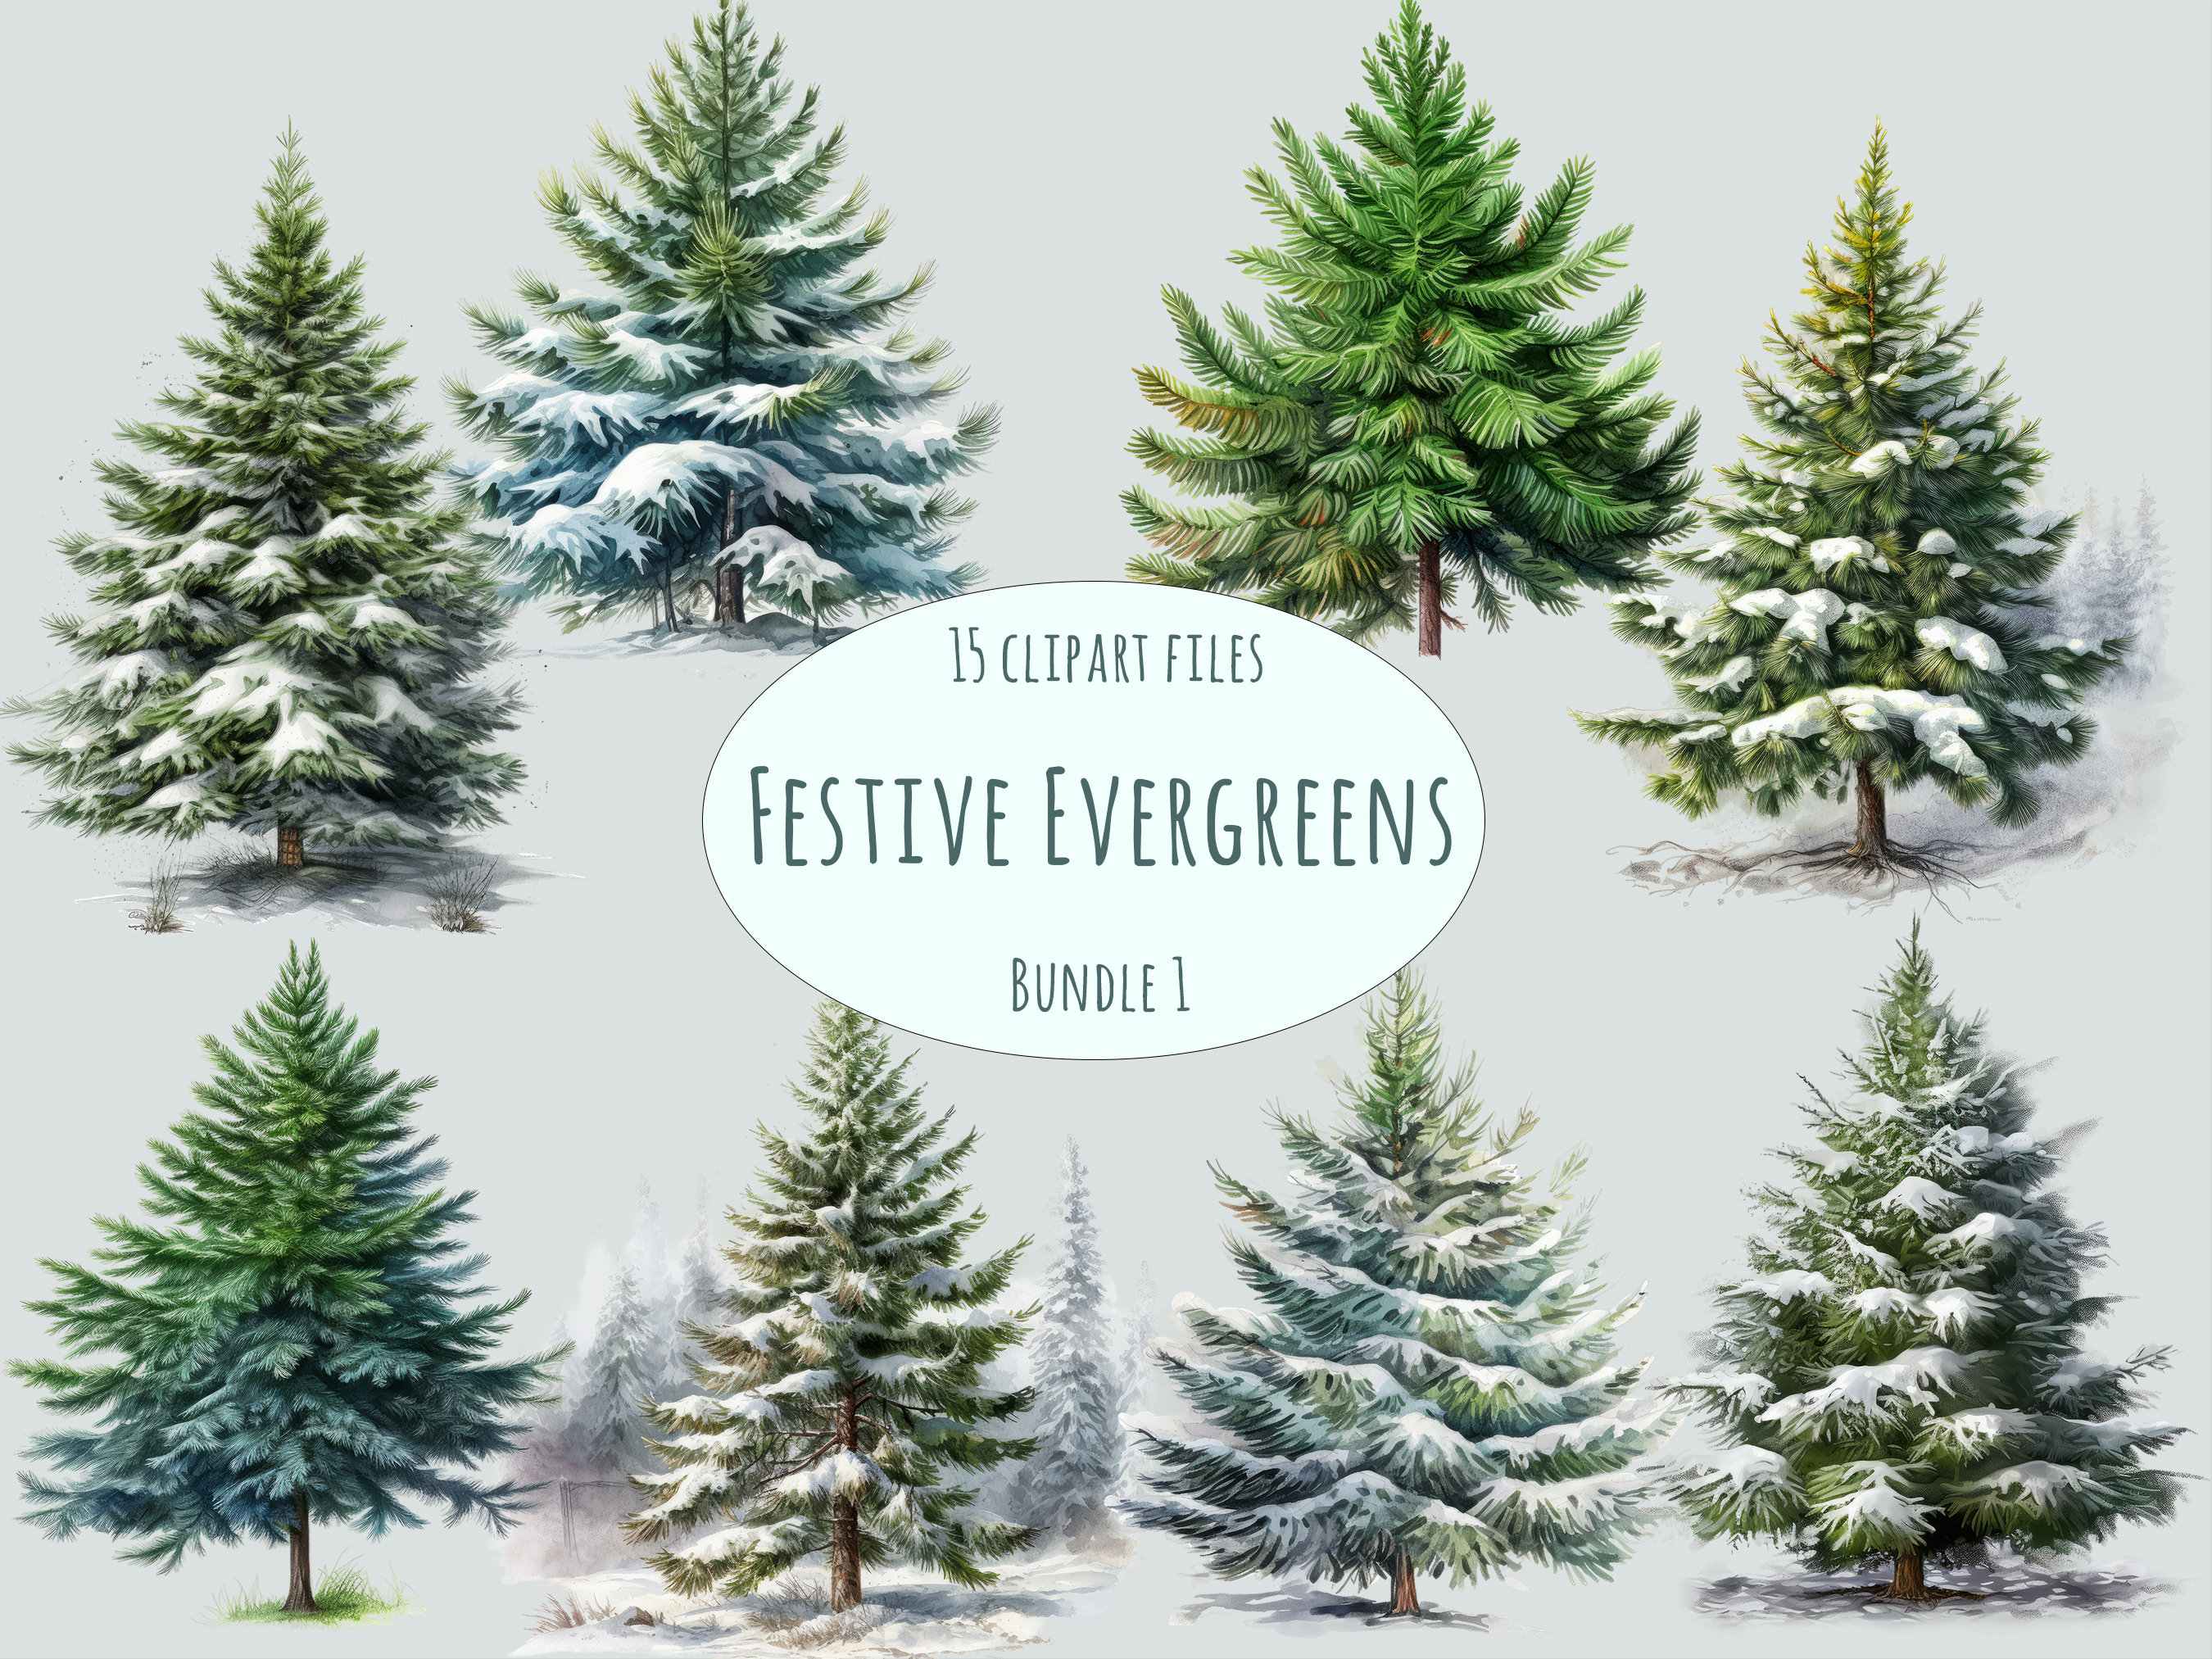 Winter Greenery Leaves Clipart, Winter Greenery Clip Art, Christmas Leaves,  Berries, Holly Watercolor Clipart Eucalyptus Mistletoe Clipart 